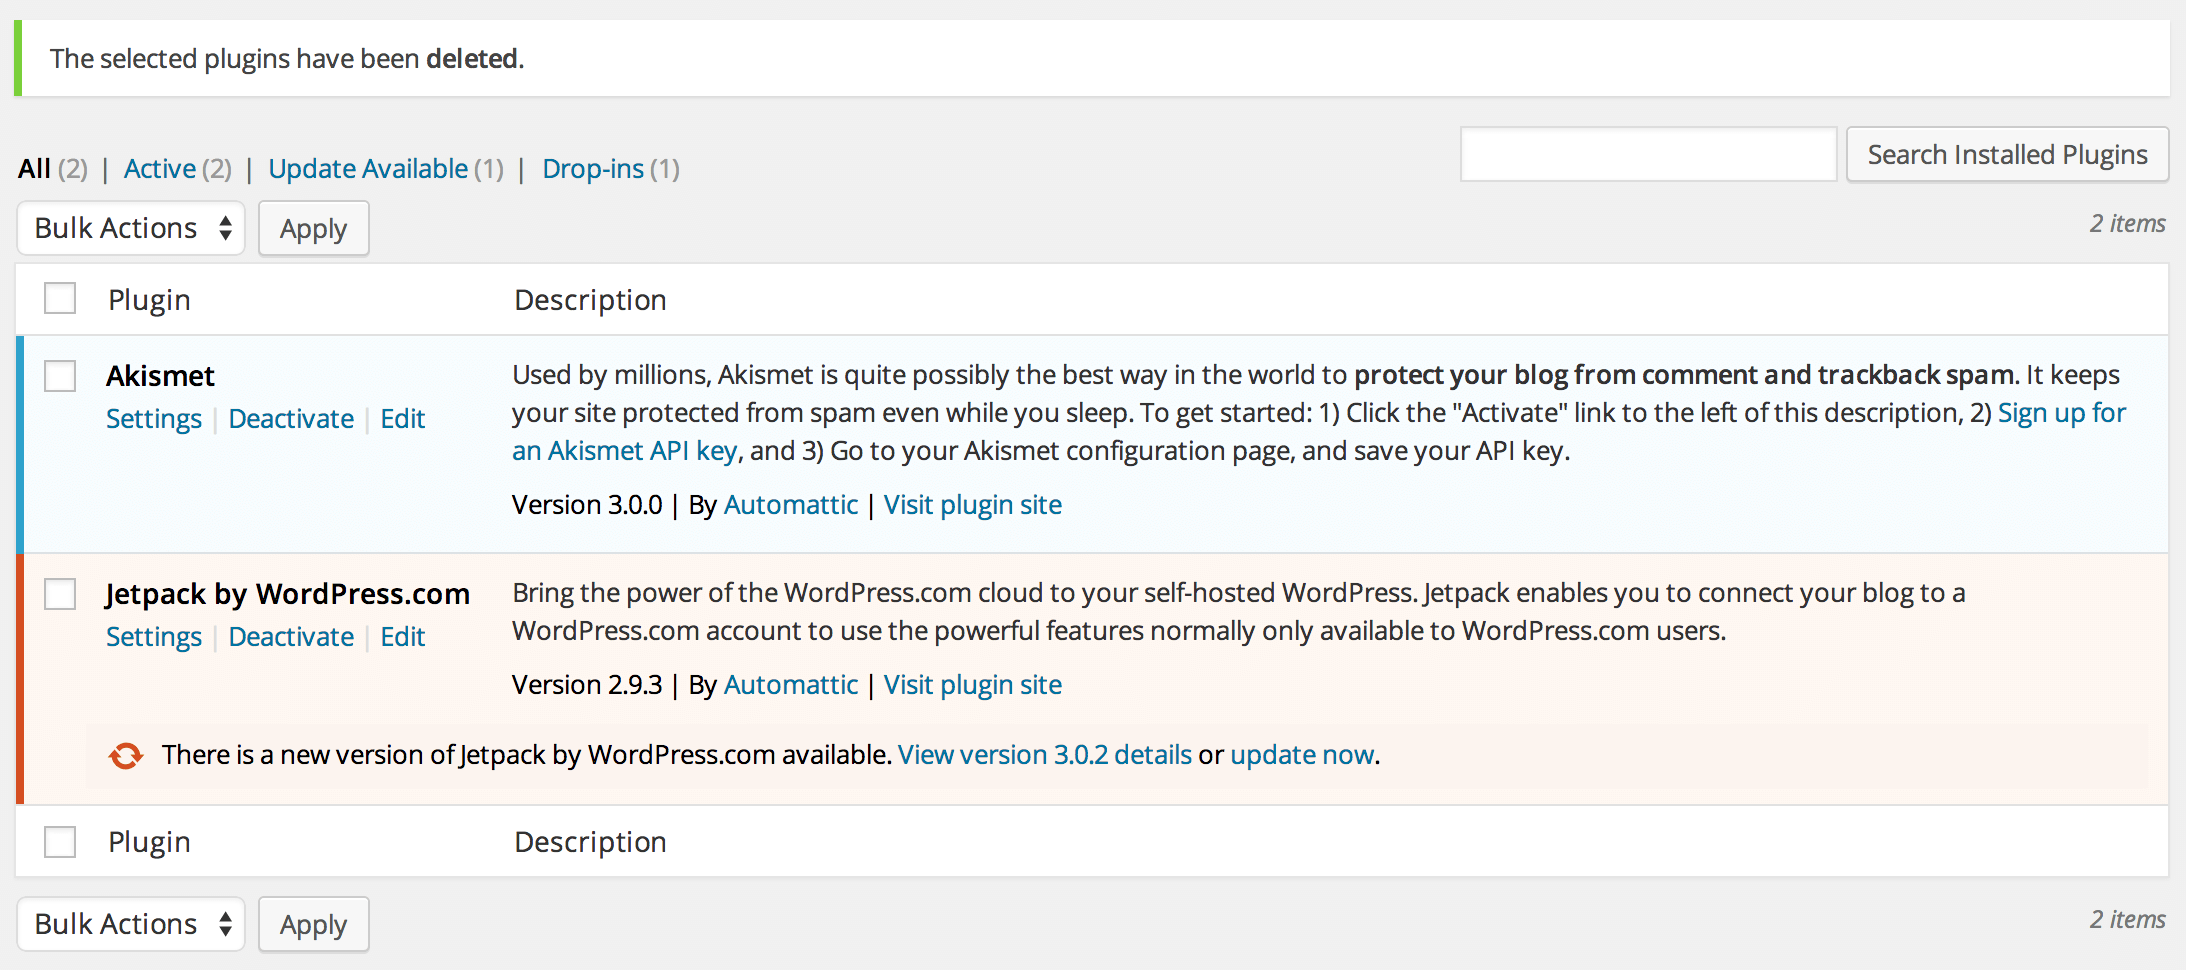 Deleted plugins confirmation